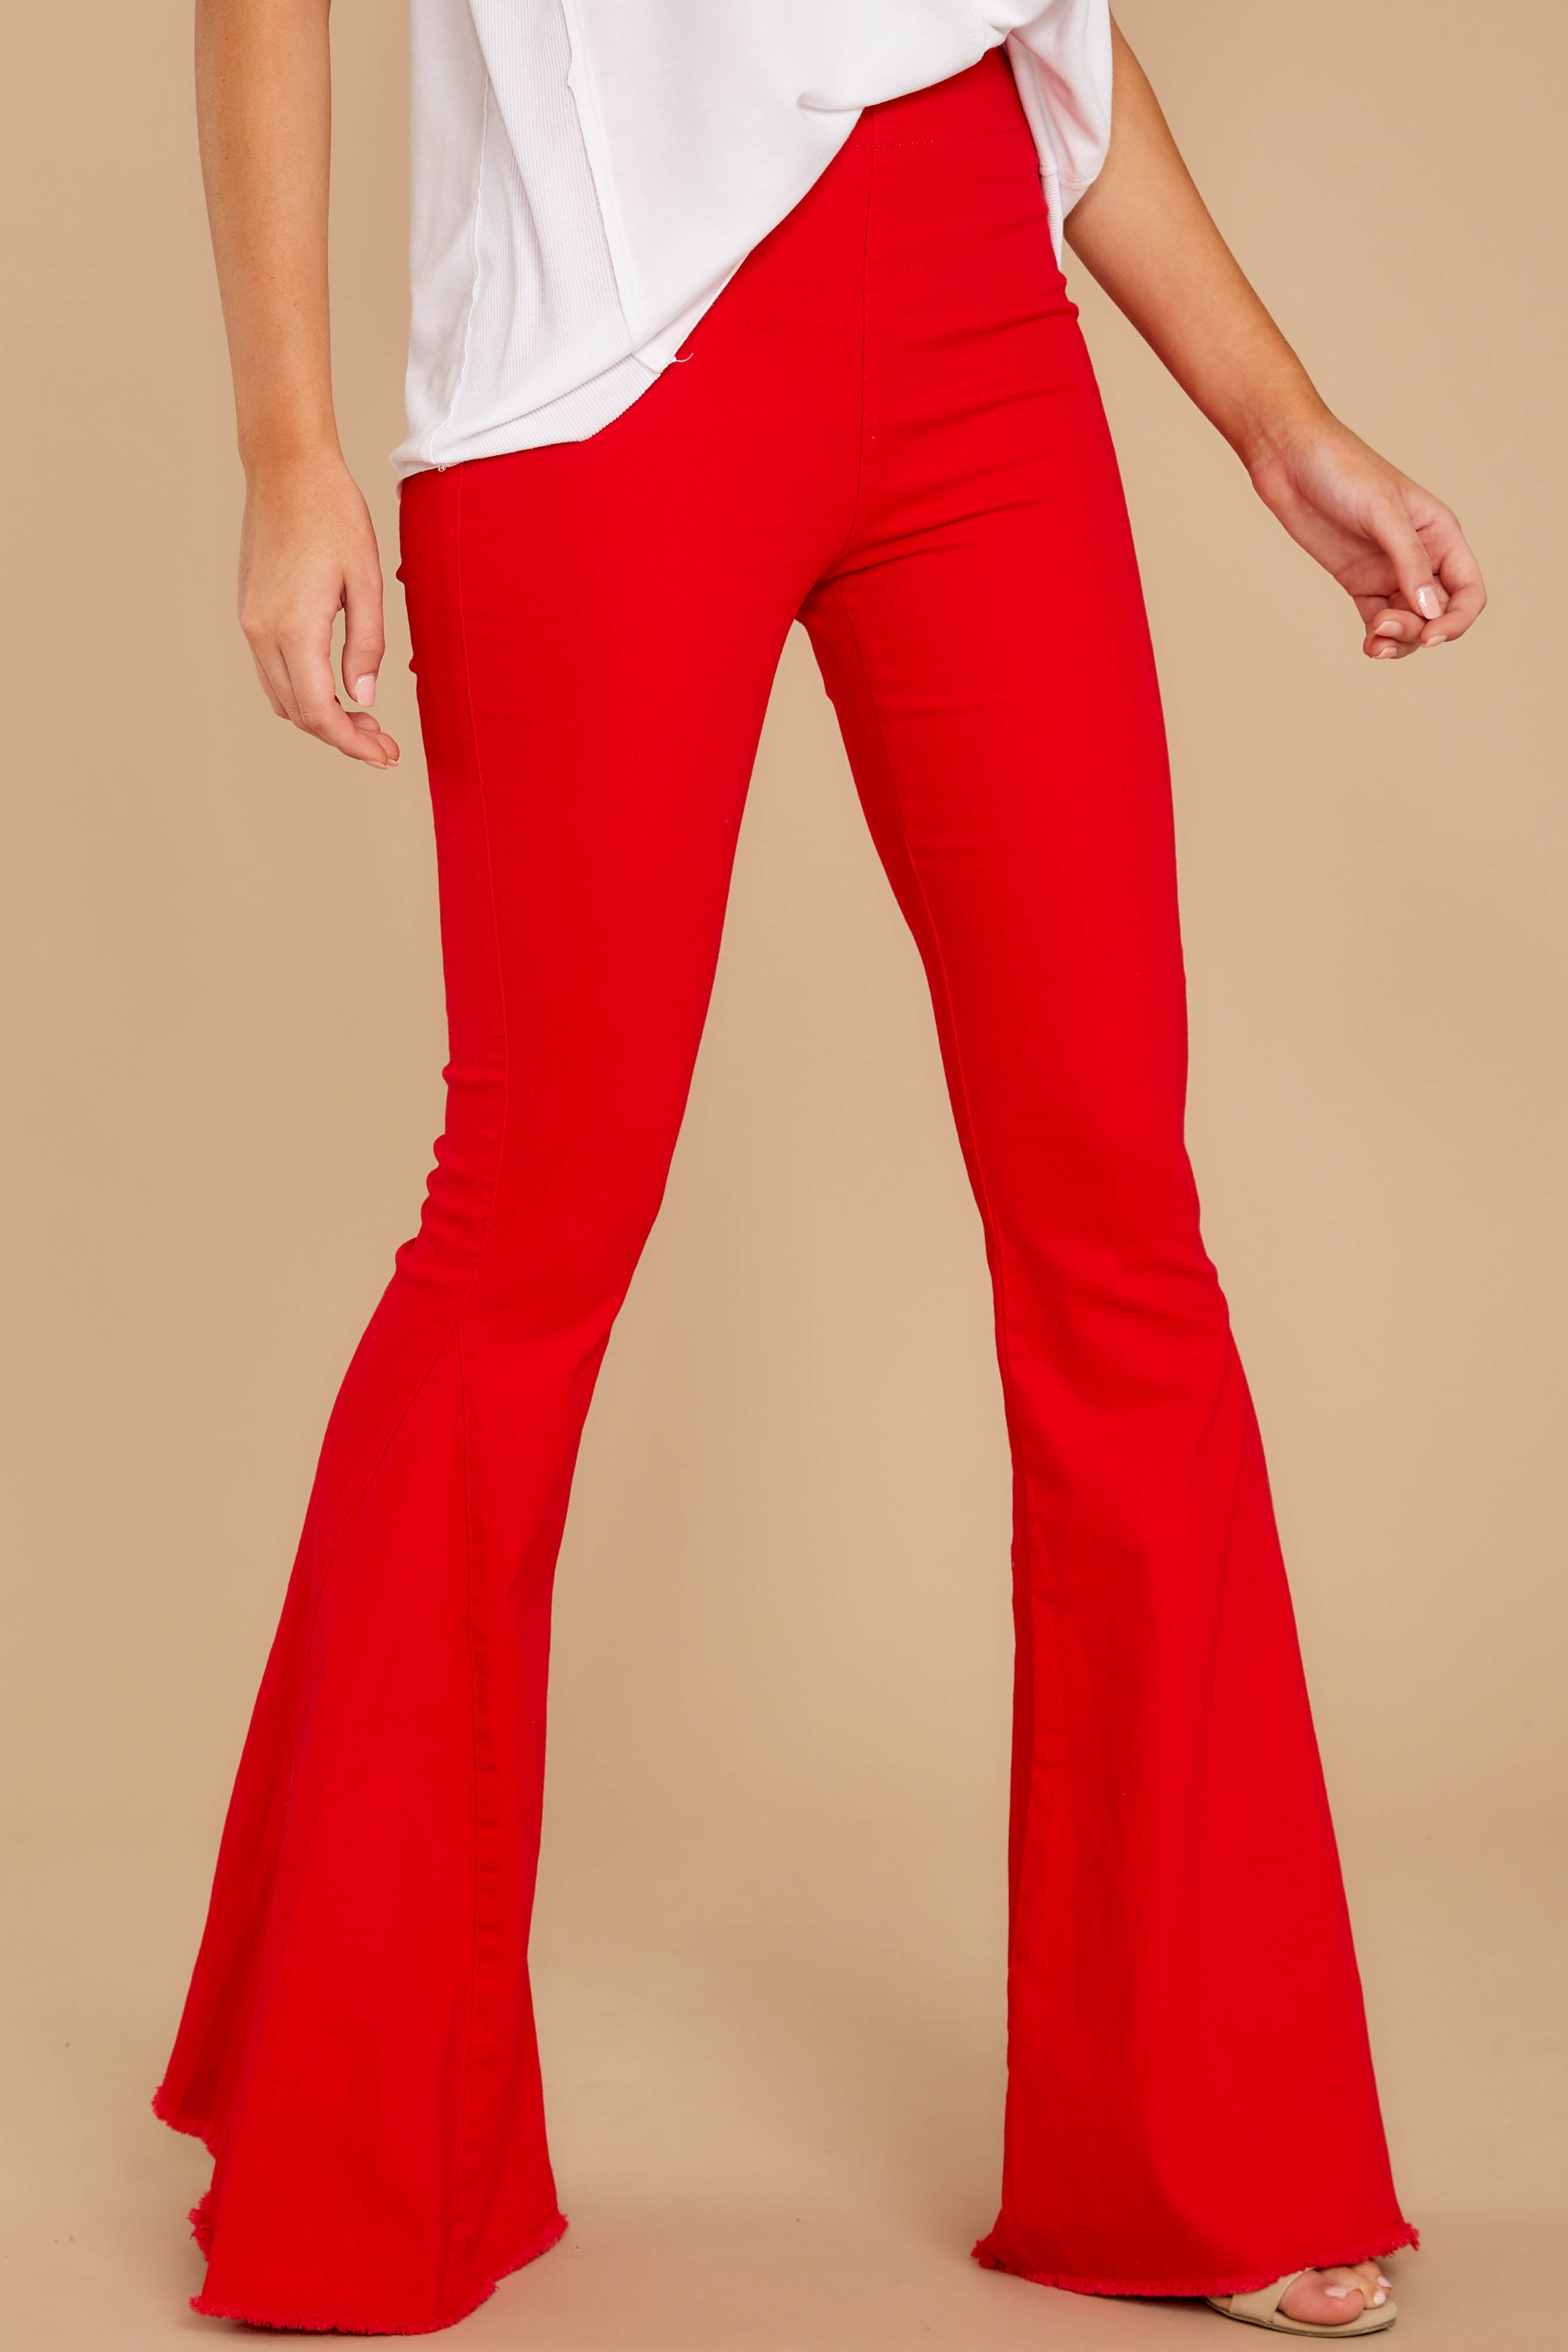 Sexy Red Flare Leg Jeans Cute Denim Bell Bottoms Pants